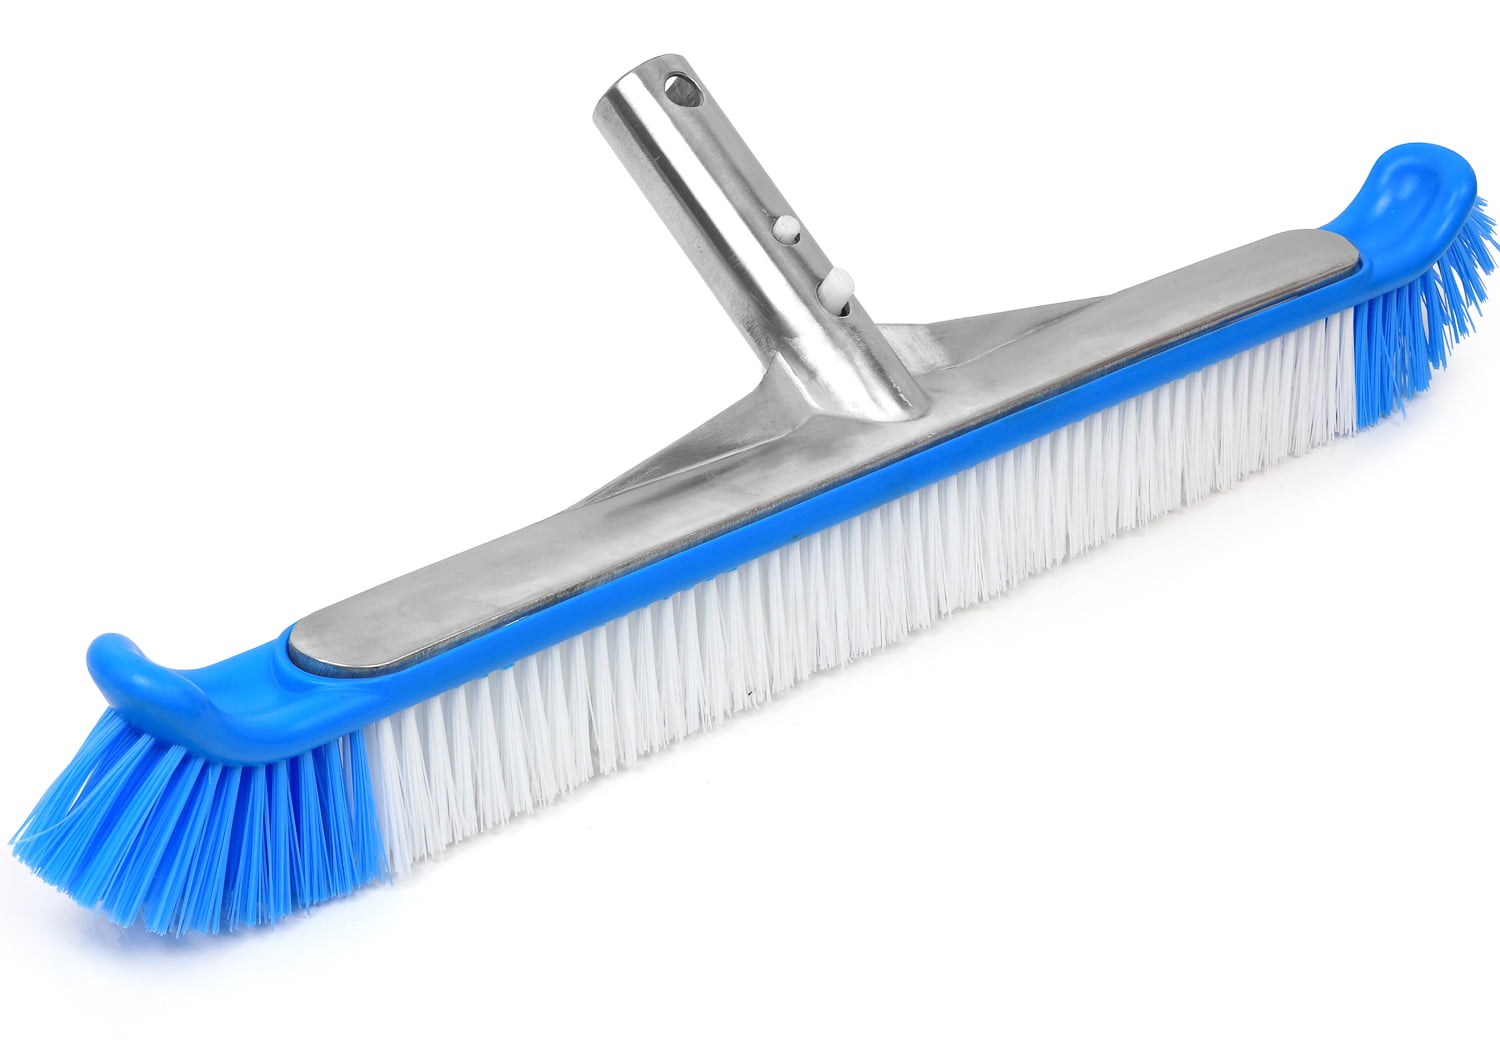 Pro 20" Pool Wall Cleaning Brush Adjustable Angle EZ Clip Handle 7 Bristle Rows 